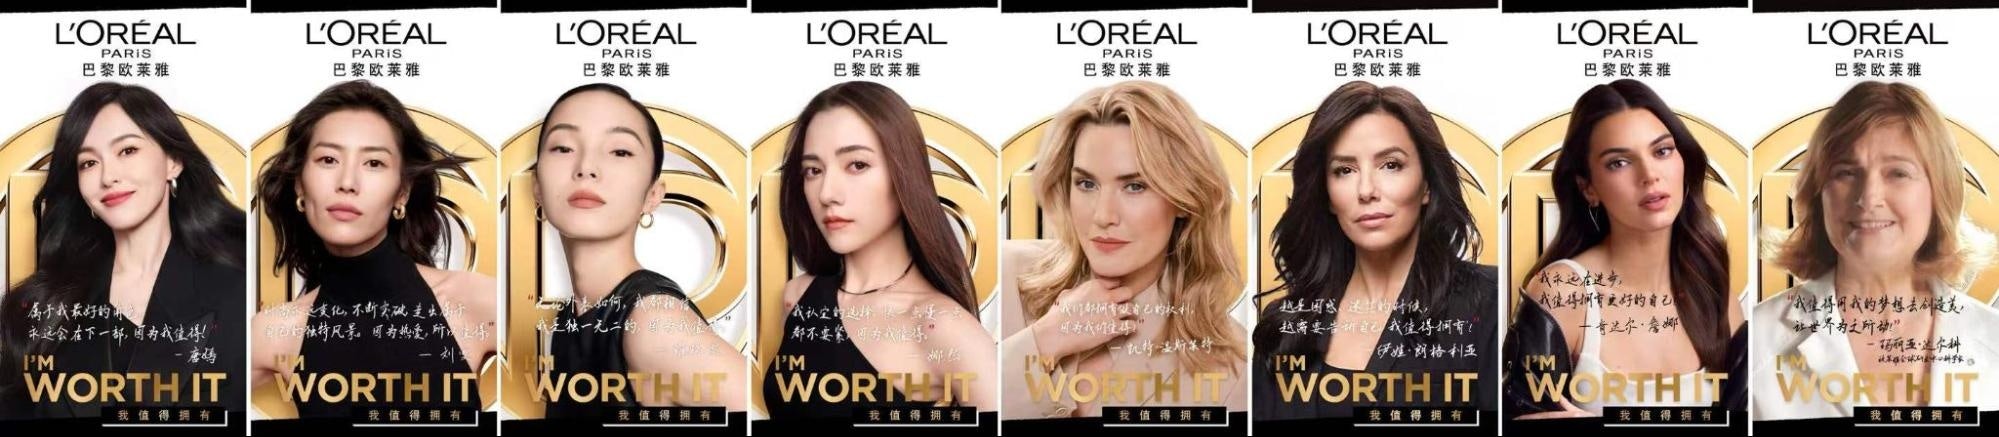 The campaign released several short videos inviting global celebrities to share their own stories of “worth.” Photo: L’Oréal Paris
